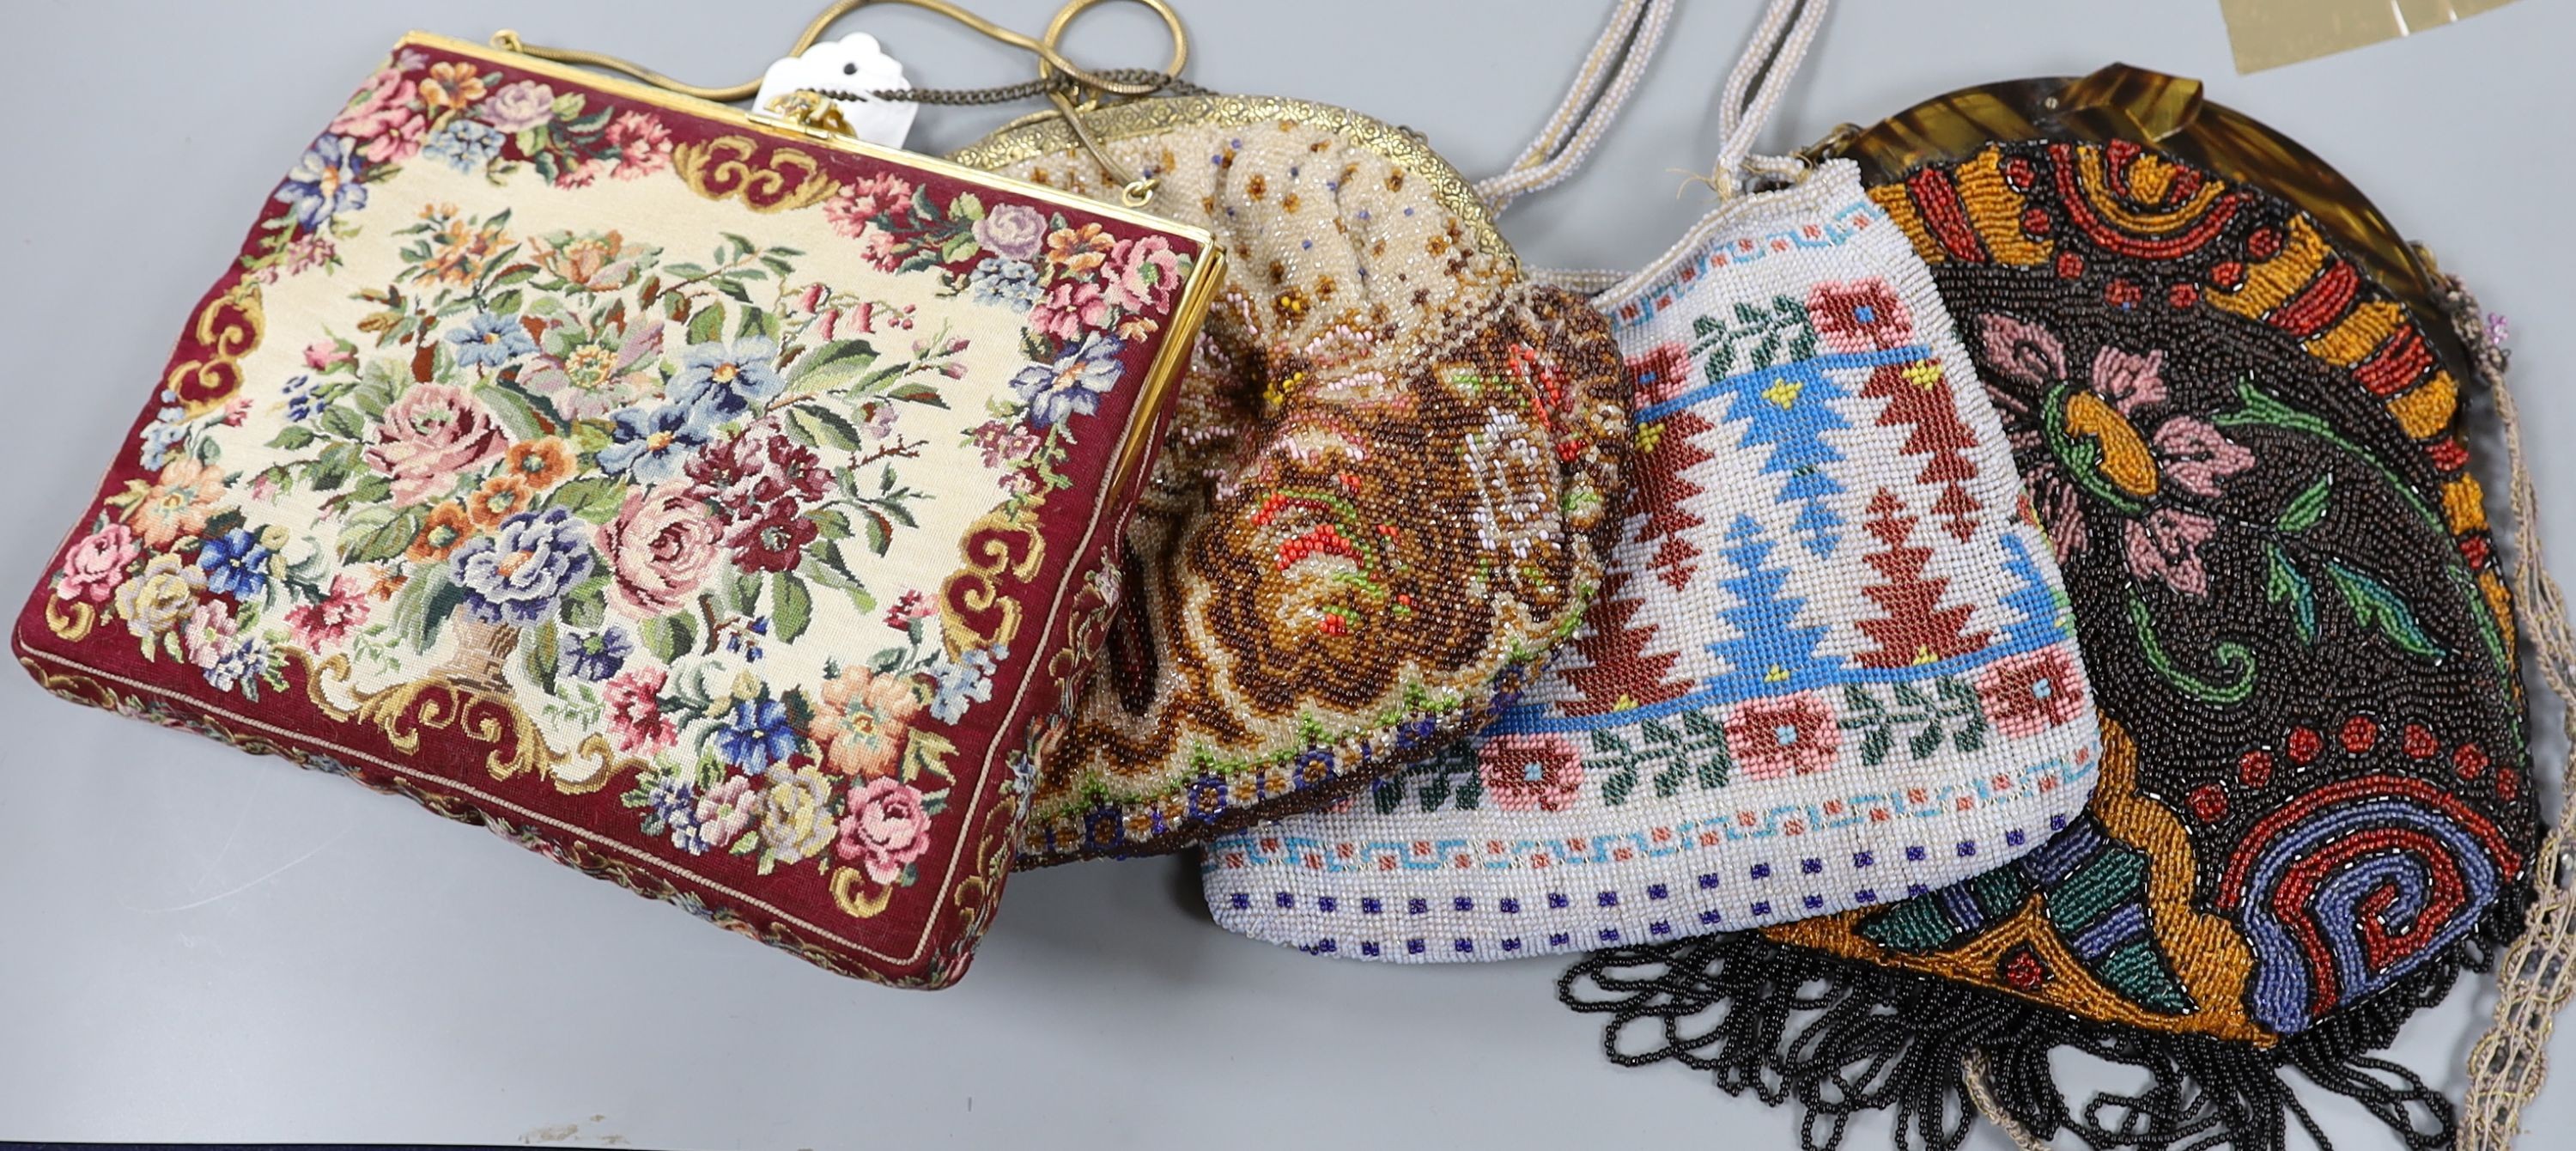 A fine needlework petit point evening bag, a 19th century bible bag, an early 20th century beaded bag and a 1930's beaded bag